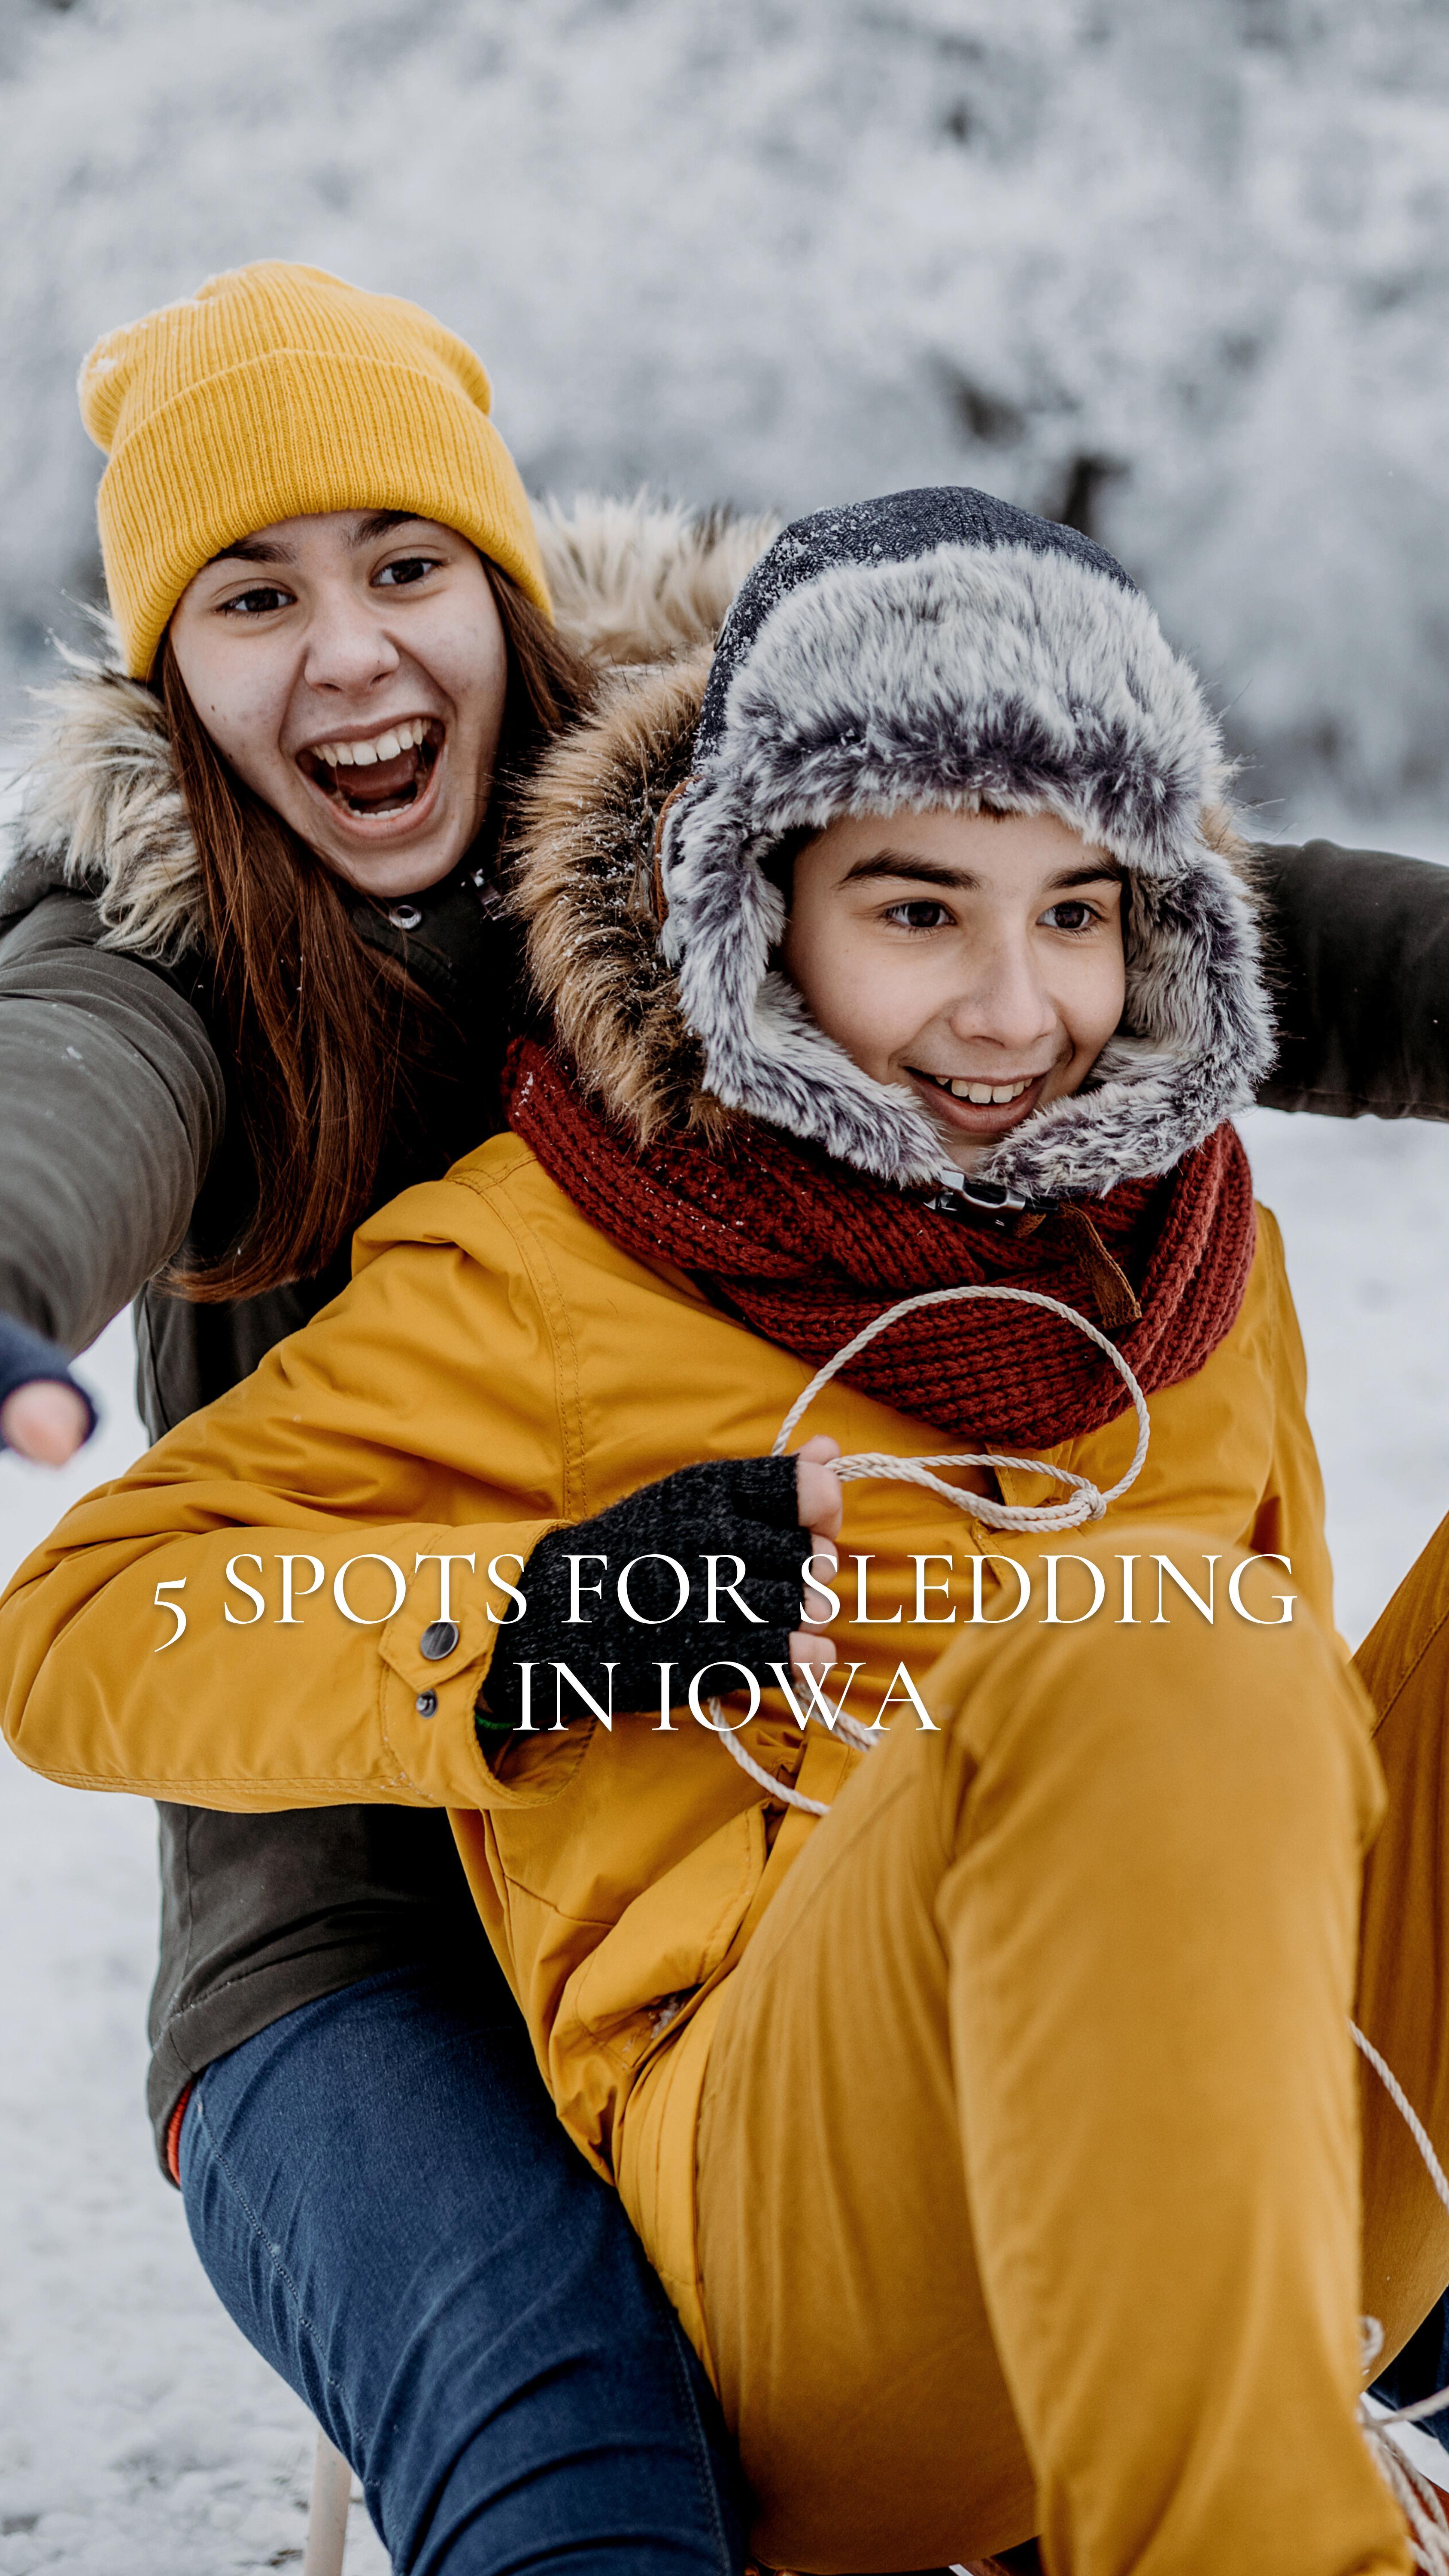 5 Spots for Sledding in Iowa 🛷 Now that winter is only 3 weeks away, it is the perfect time to dust off our sleds and warm them up for the hottest spots for sledding in Iowa! Click the link in our bio for the full article!